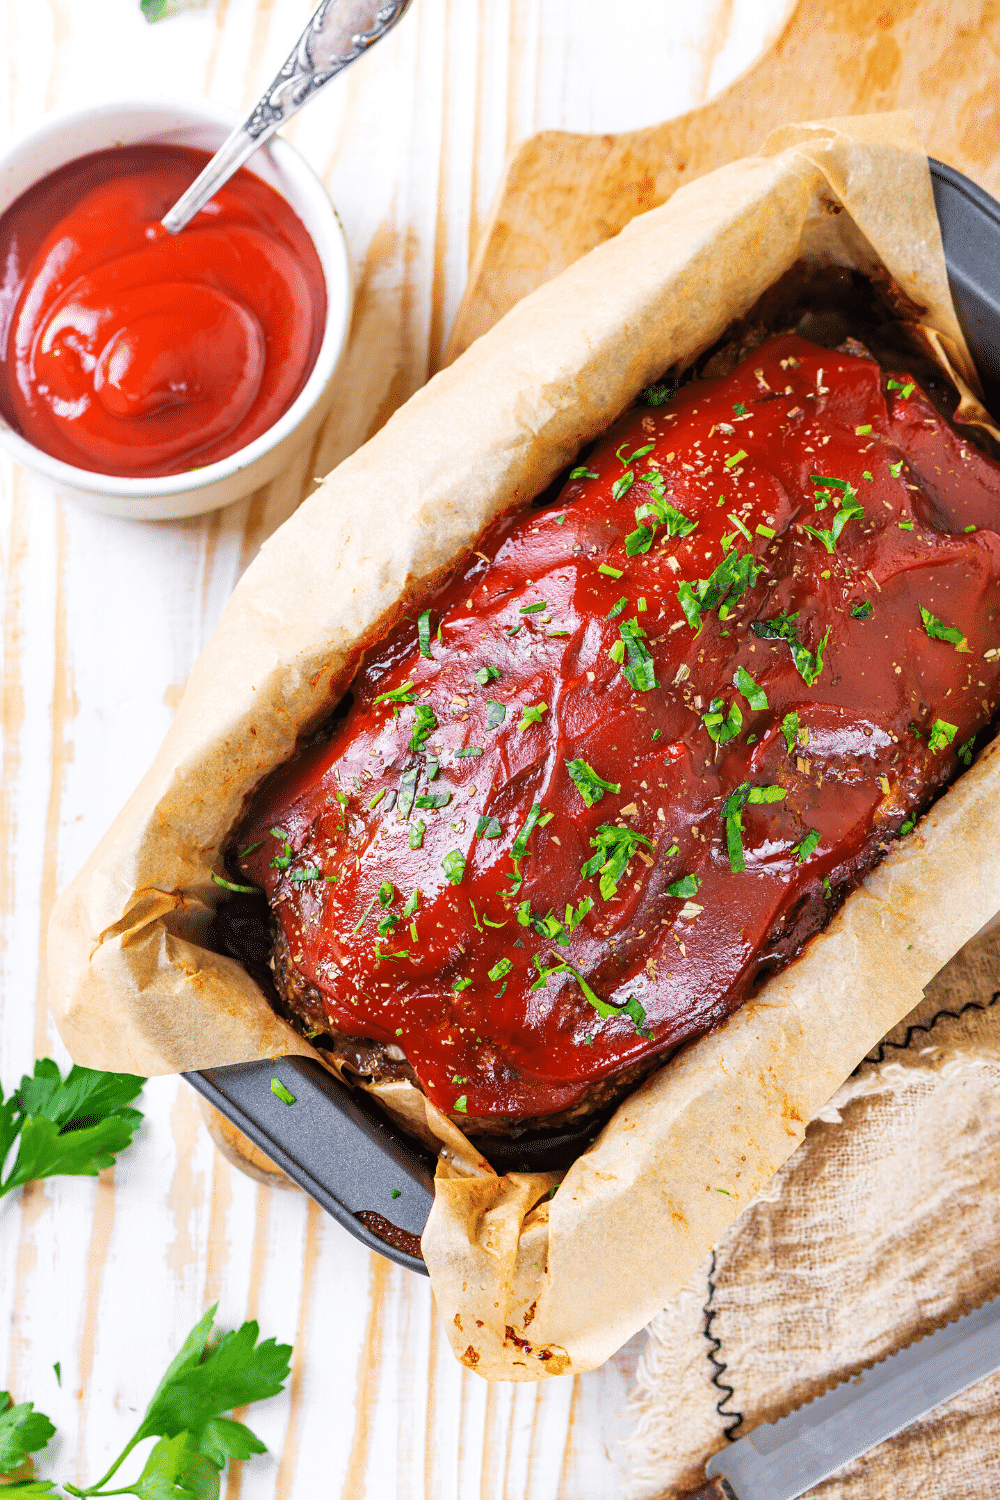 A meatloaf in a loaf pan with a piece of parchment paper underneath the meatloaf. A small cup of ketchup is to the back left of the meatloaf.